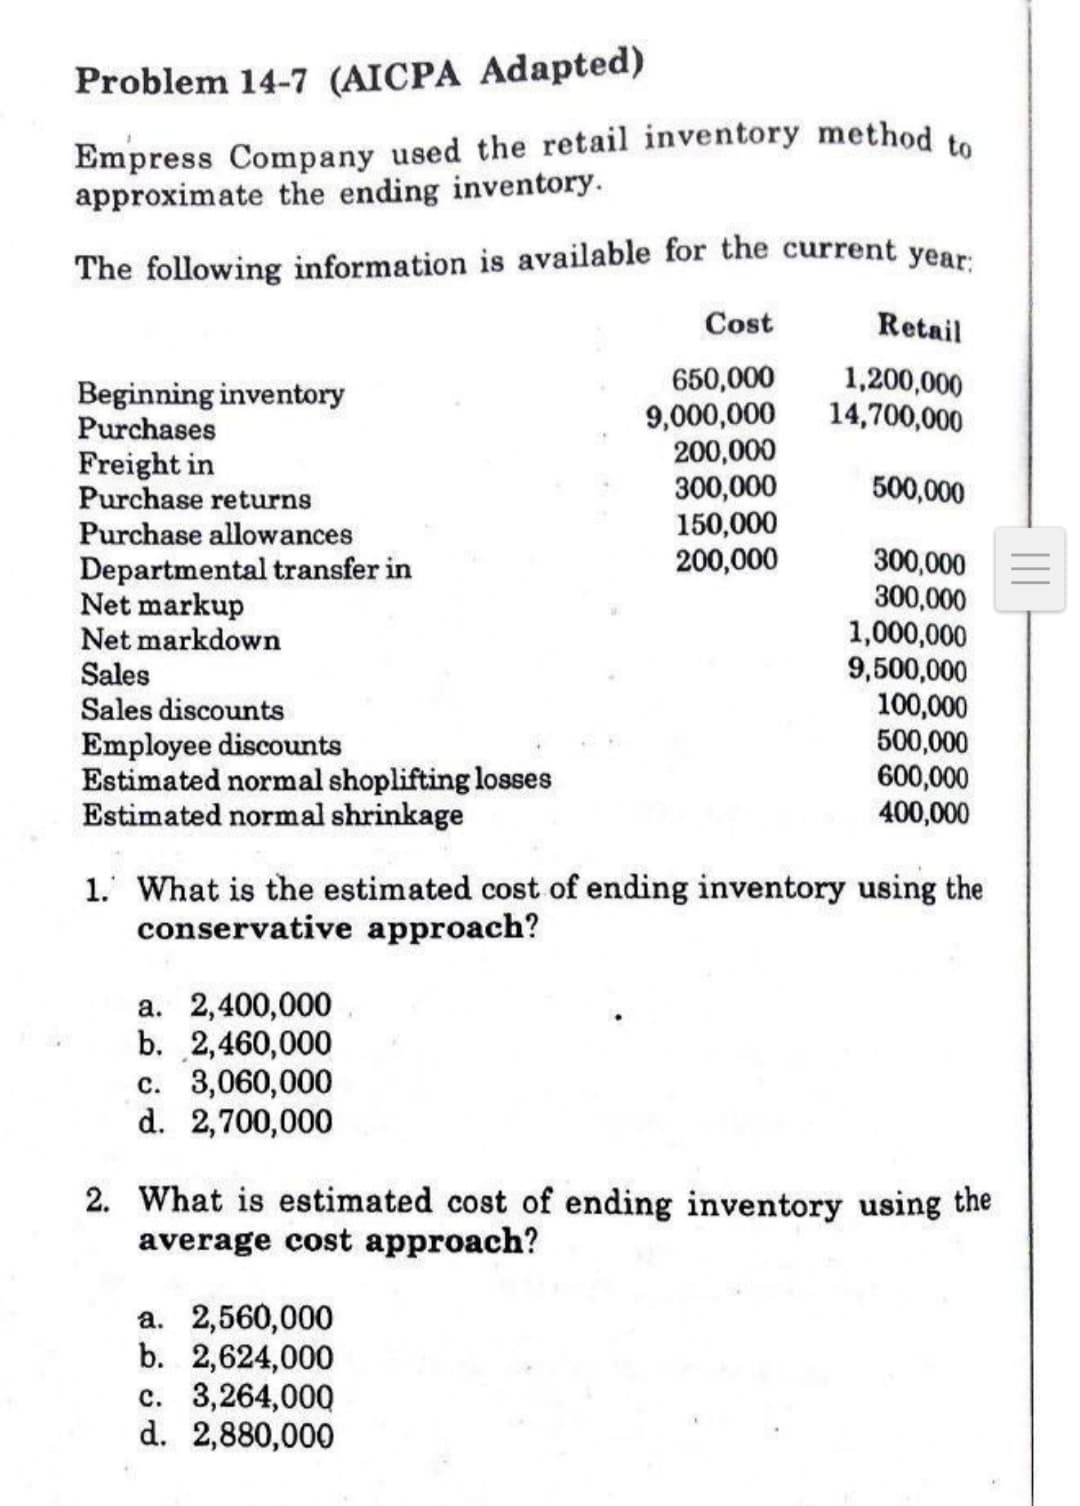 Problem 14-7 (AICPA Adapted)
Empress Company used the retail inventory method to
approximate the ending inventory.
The following information is available for the current year
Cost
Retail
650,000
9,000,000
200,000
300,000
150,000
200,000
Beginning inventory
Purchases
1,200,000
14,700,000
Freight in
Purchase returns
500,000
Purchase allowances
Departmental transfer in
Net markup
Net markdown
Sales
Sales discounts
300,000
300,000
1,000,000
9,500,000
100,000
500,000
600,000
400,000
Employee discounts
Estimated normal shoplifting losses
Estimated normal shrinkage
1. What is the estimated cost of ending inventory using the
conservative approach?
a. 2,400,000
b. 2,460,000
c. 3,060,000
d. 2,700,000
2. What is estimated cost of ending inventory using the
average cost approach?
a. 2,560,000
b. 2,624,000
c. 3,264,000
d. 2,880,000
